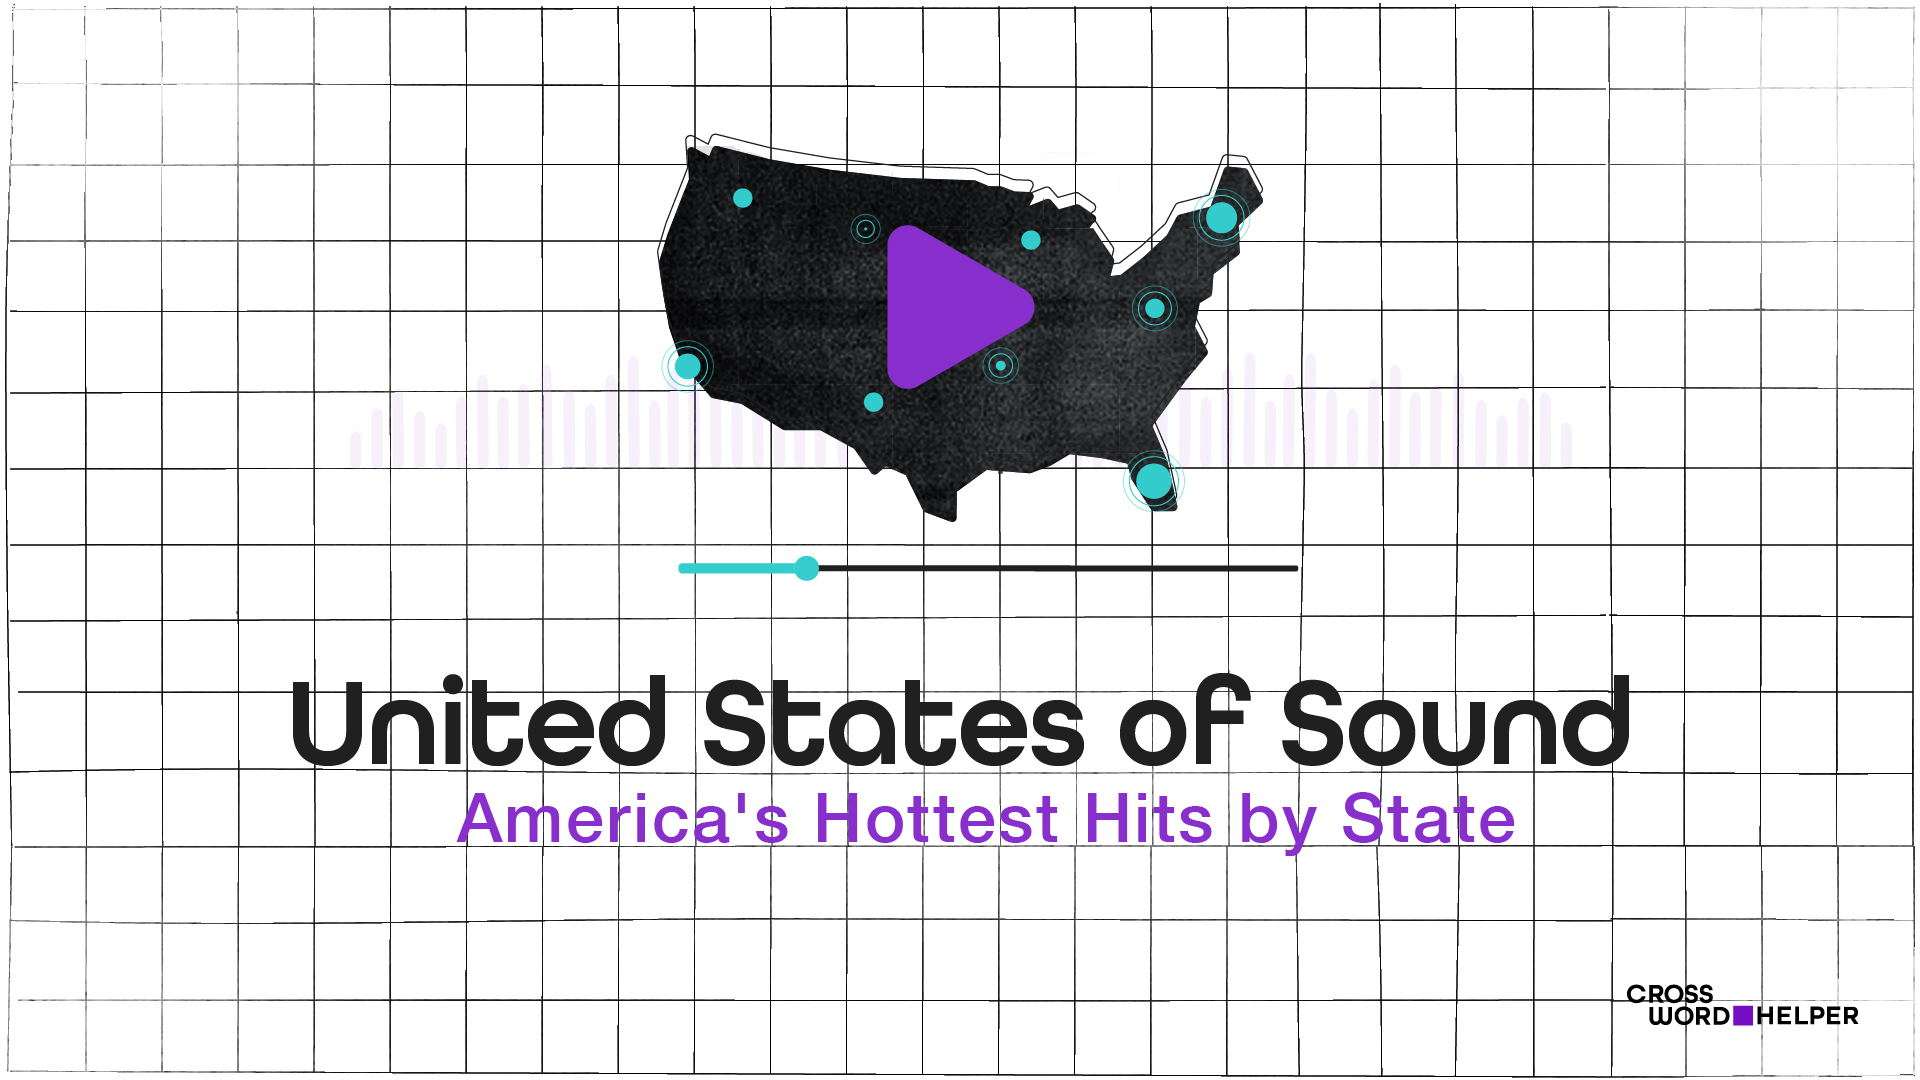 America's Hottest Hits by State